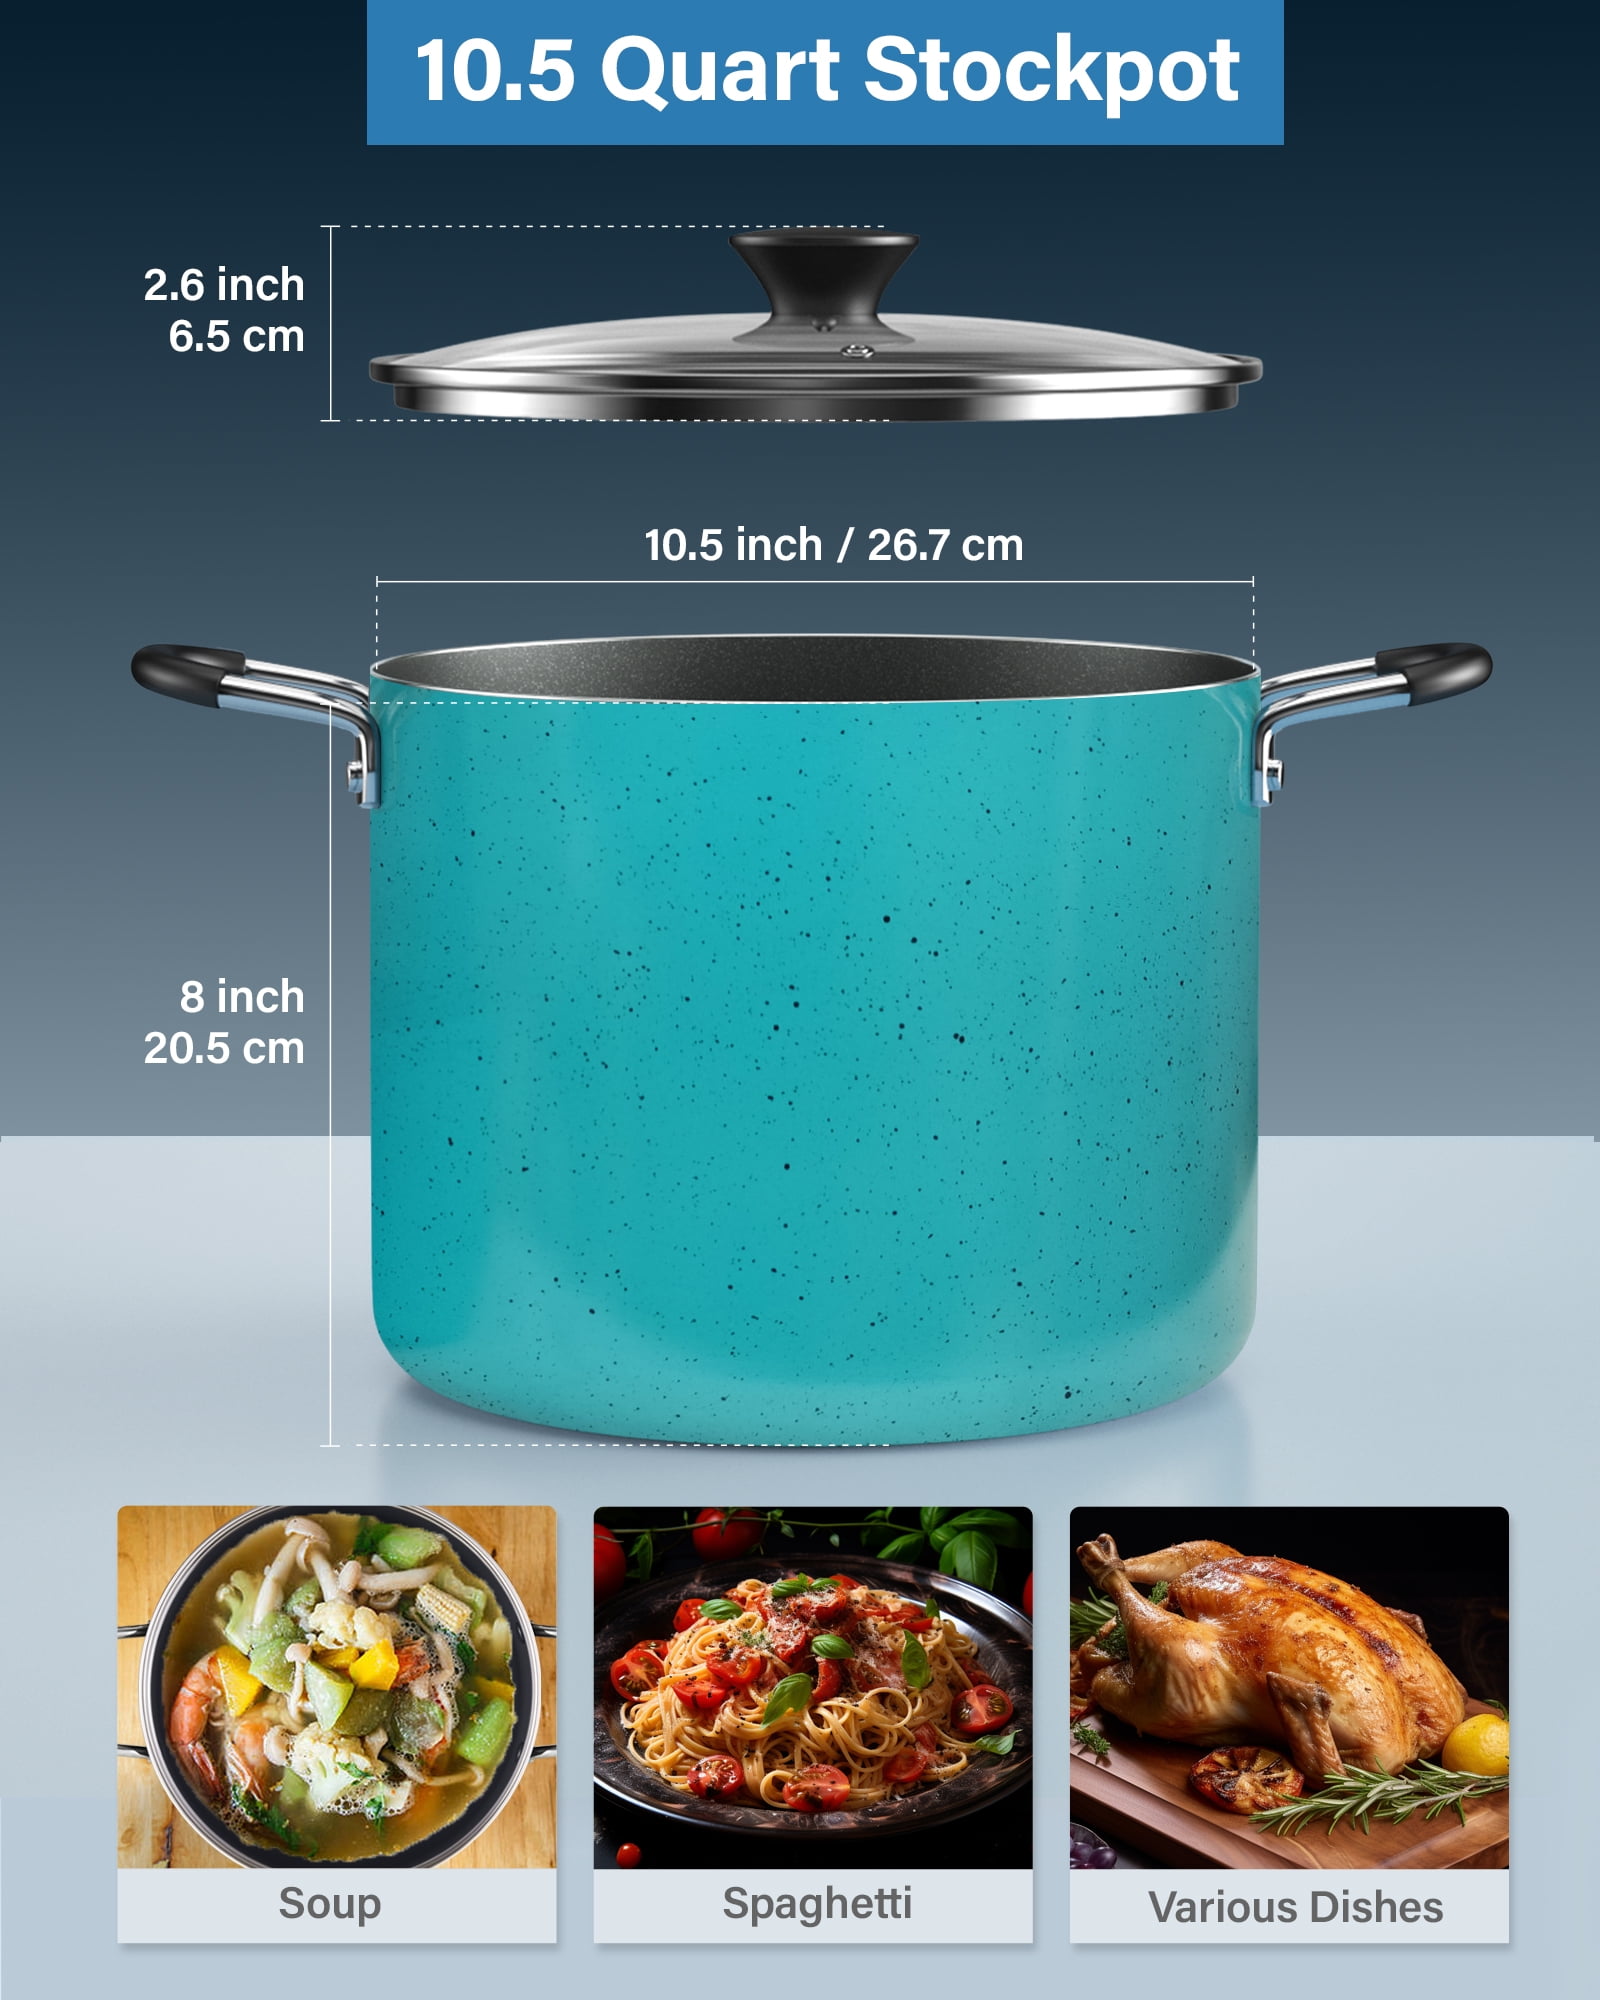 Tonchean 5.4 Quart Delicious Nonstick Induction Stockpot with Lid